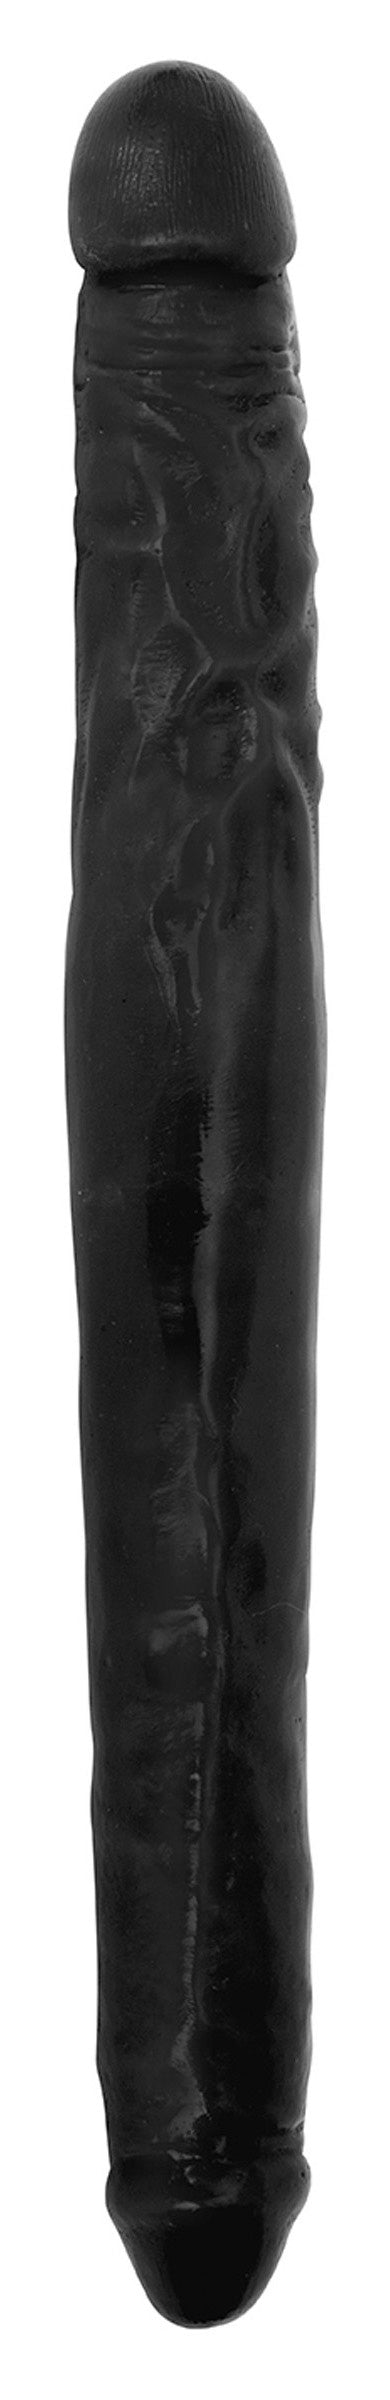 JOCK 16 Inch Tapered Double Dong Black - CN-09-0406-20 - UPC-642610430794